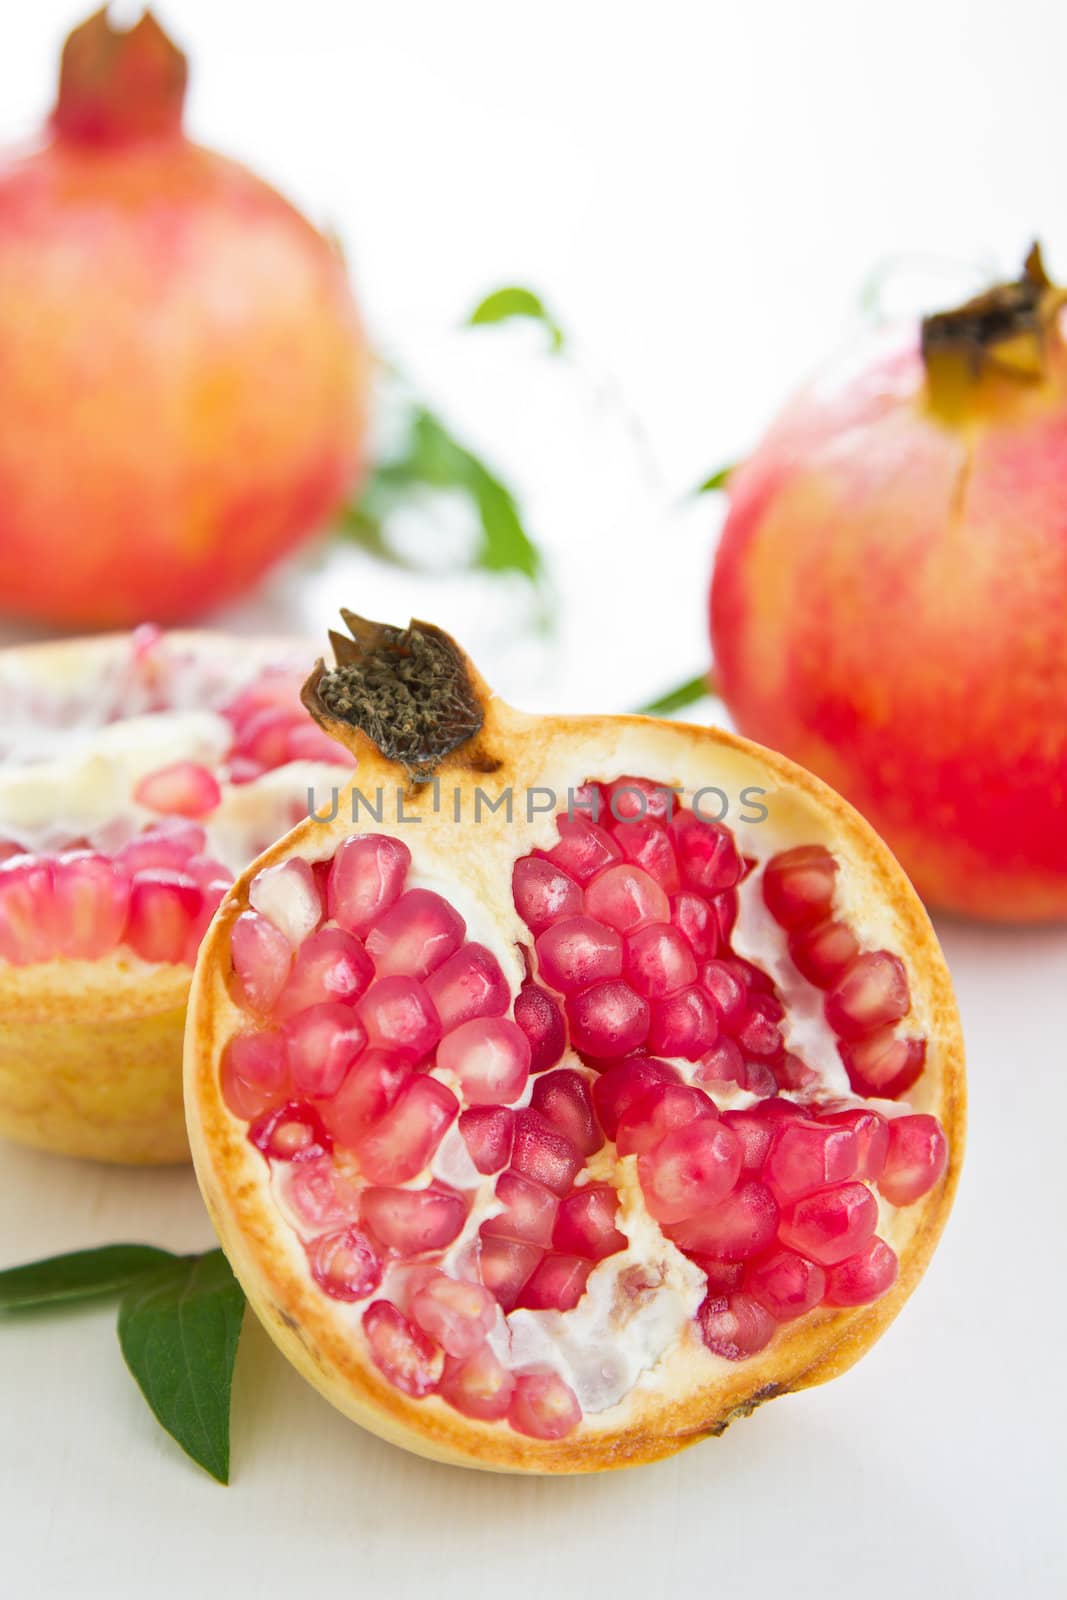 Pomegranate by vanillaechoes